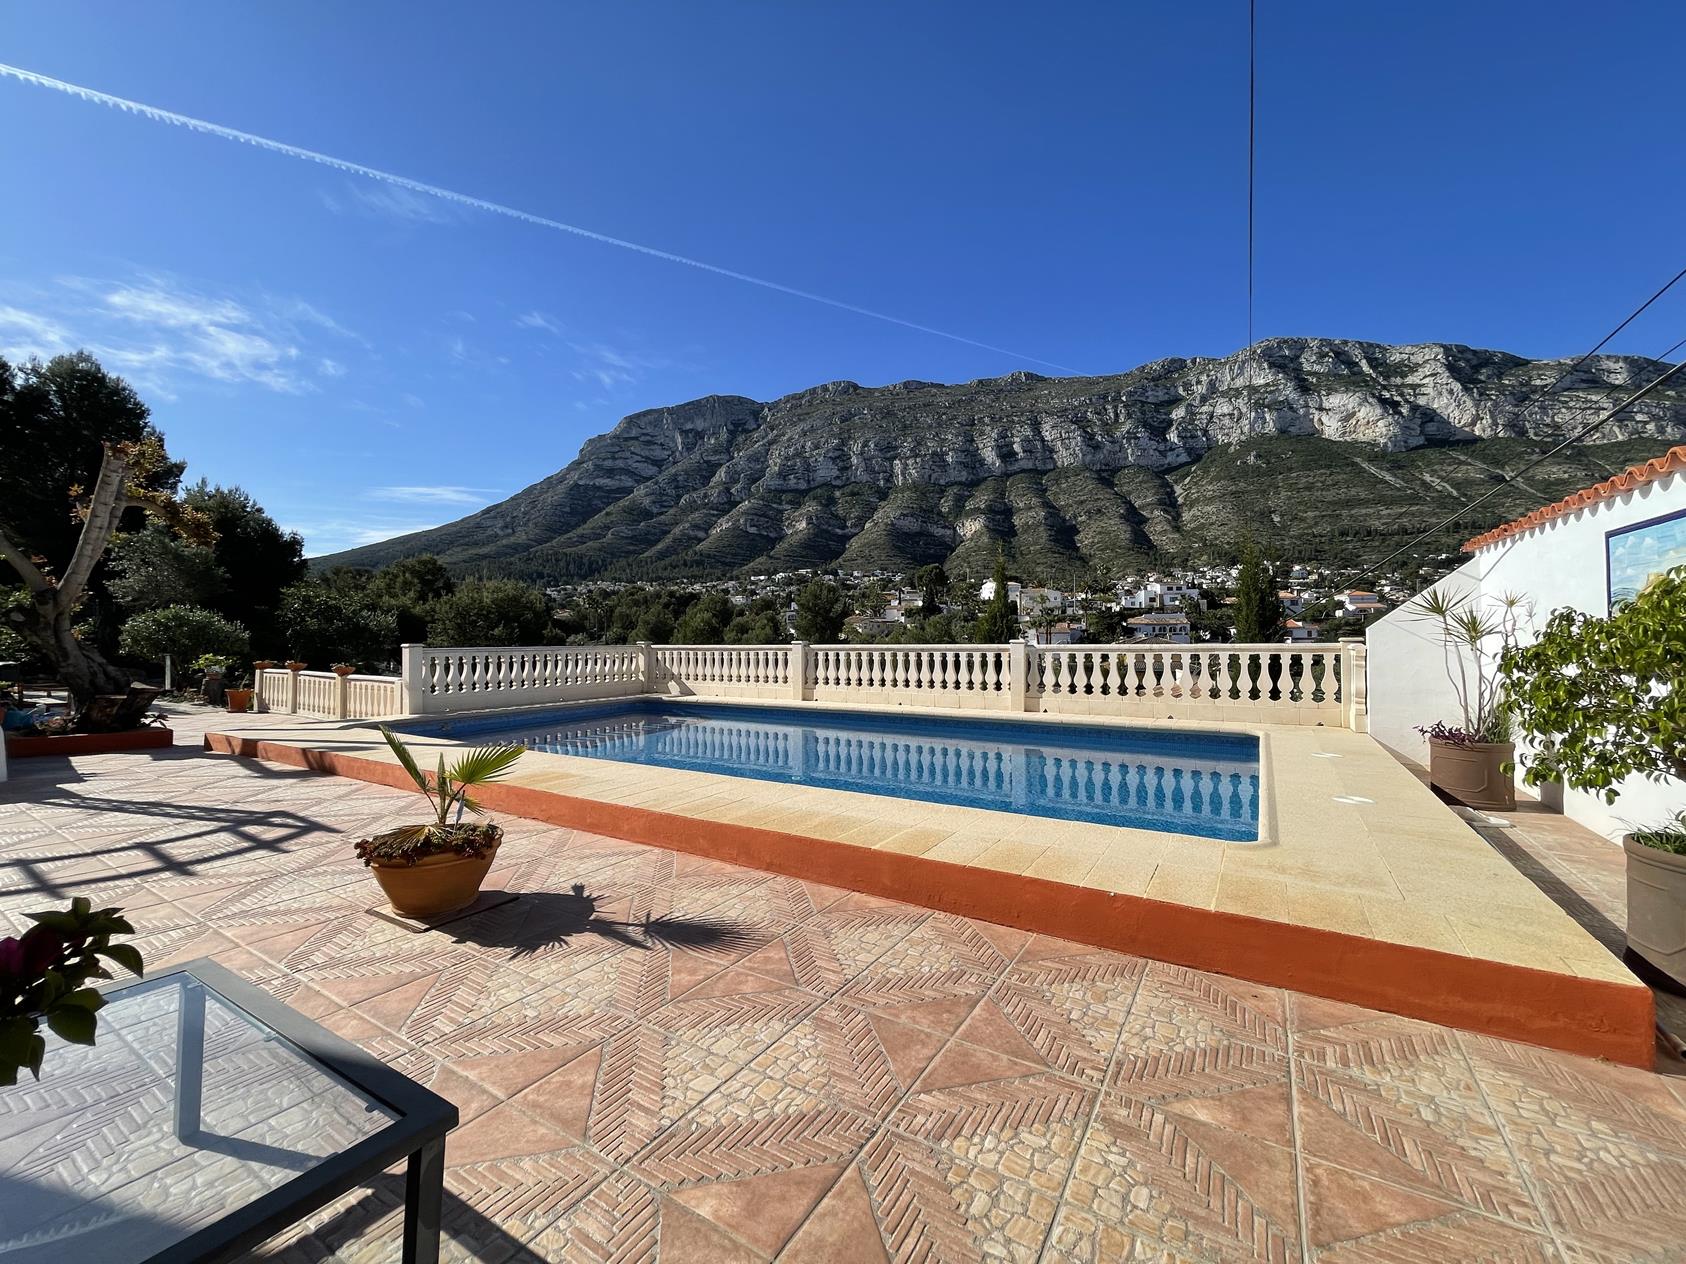 Villa with pool and view of the Montgó - Santa Lucía